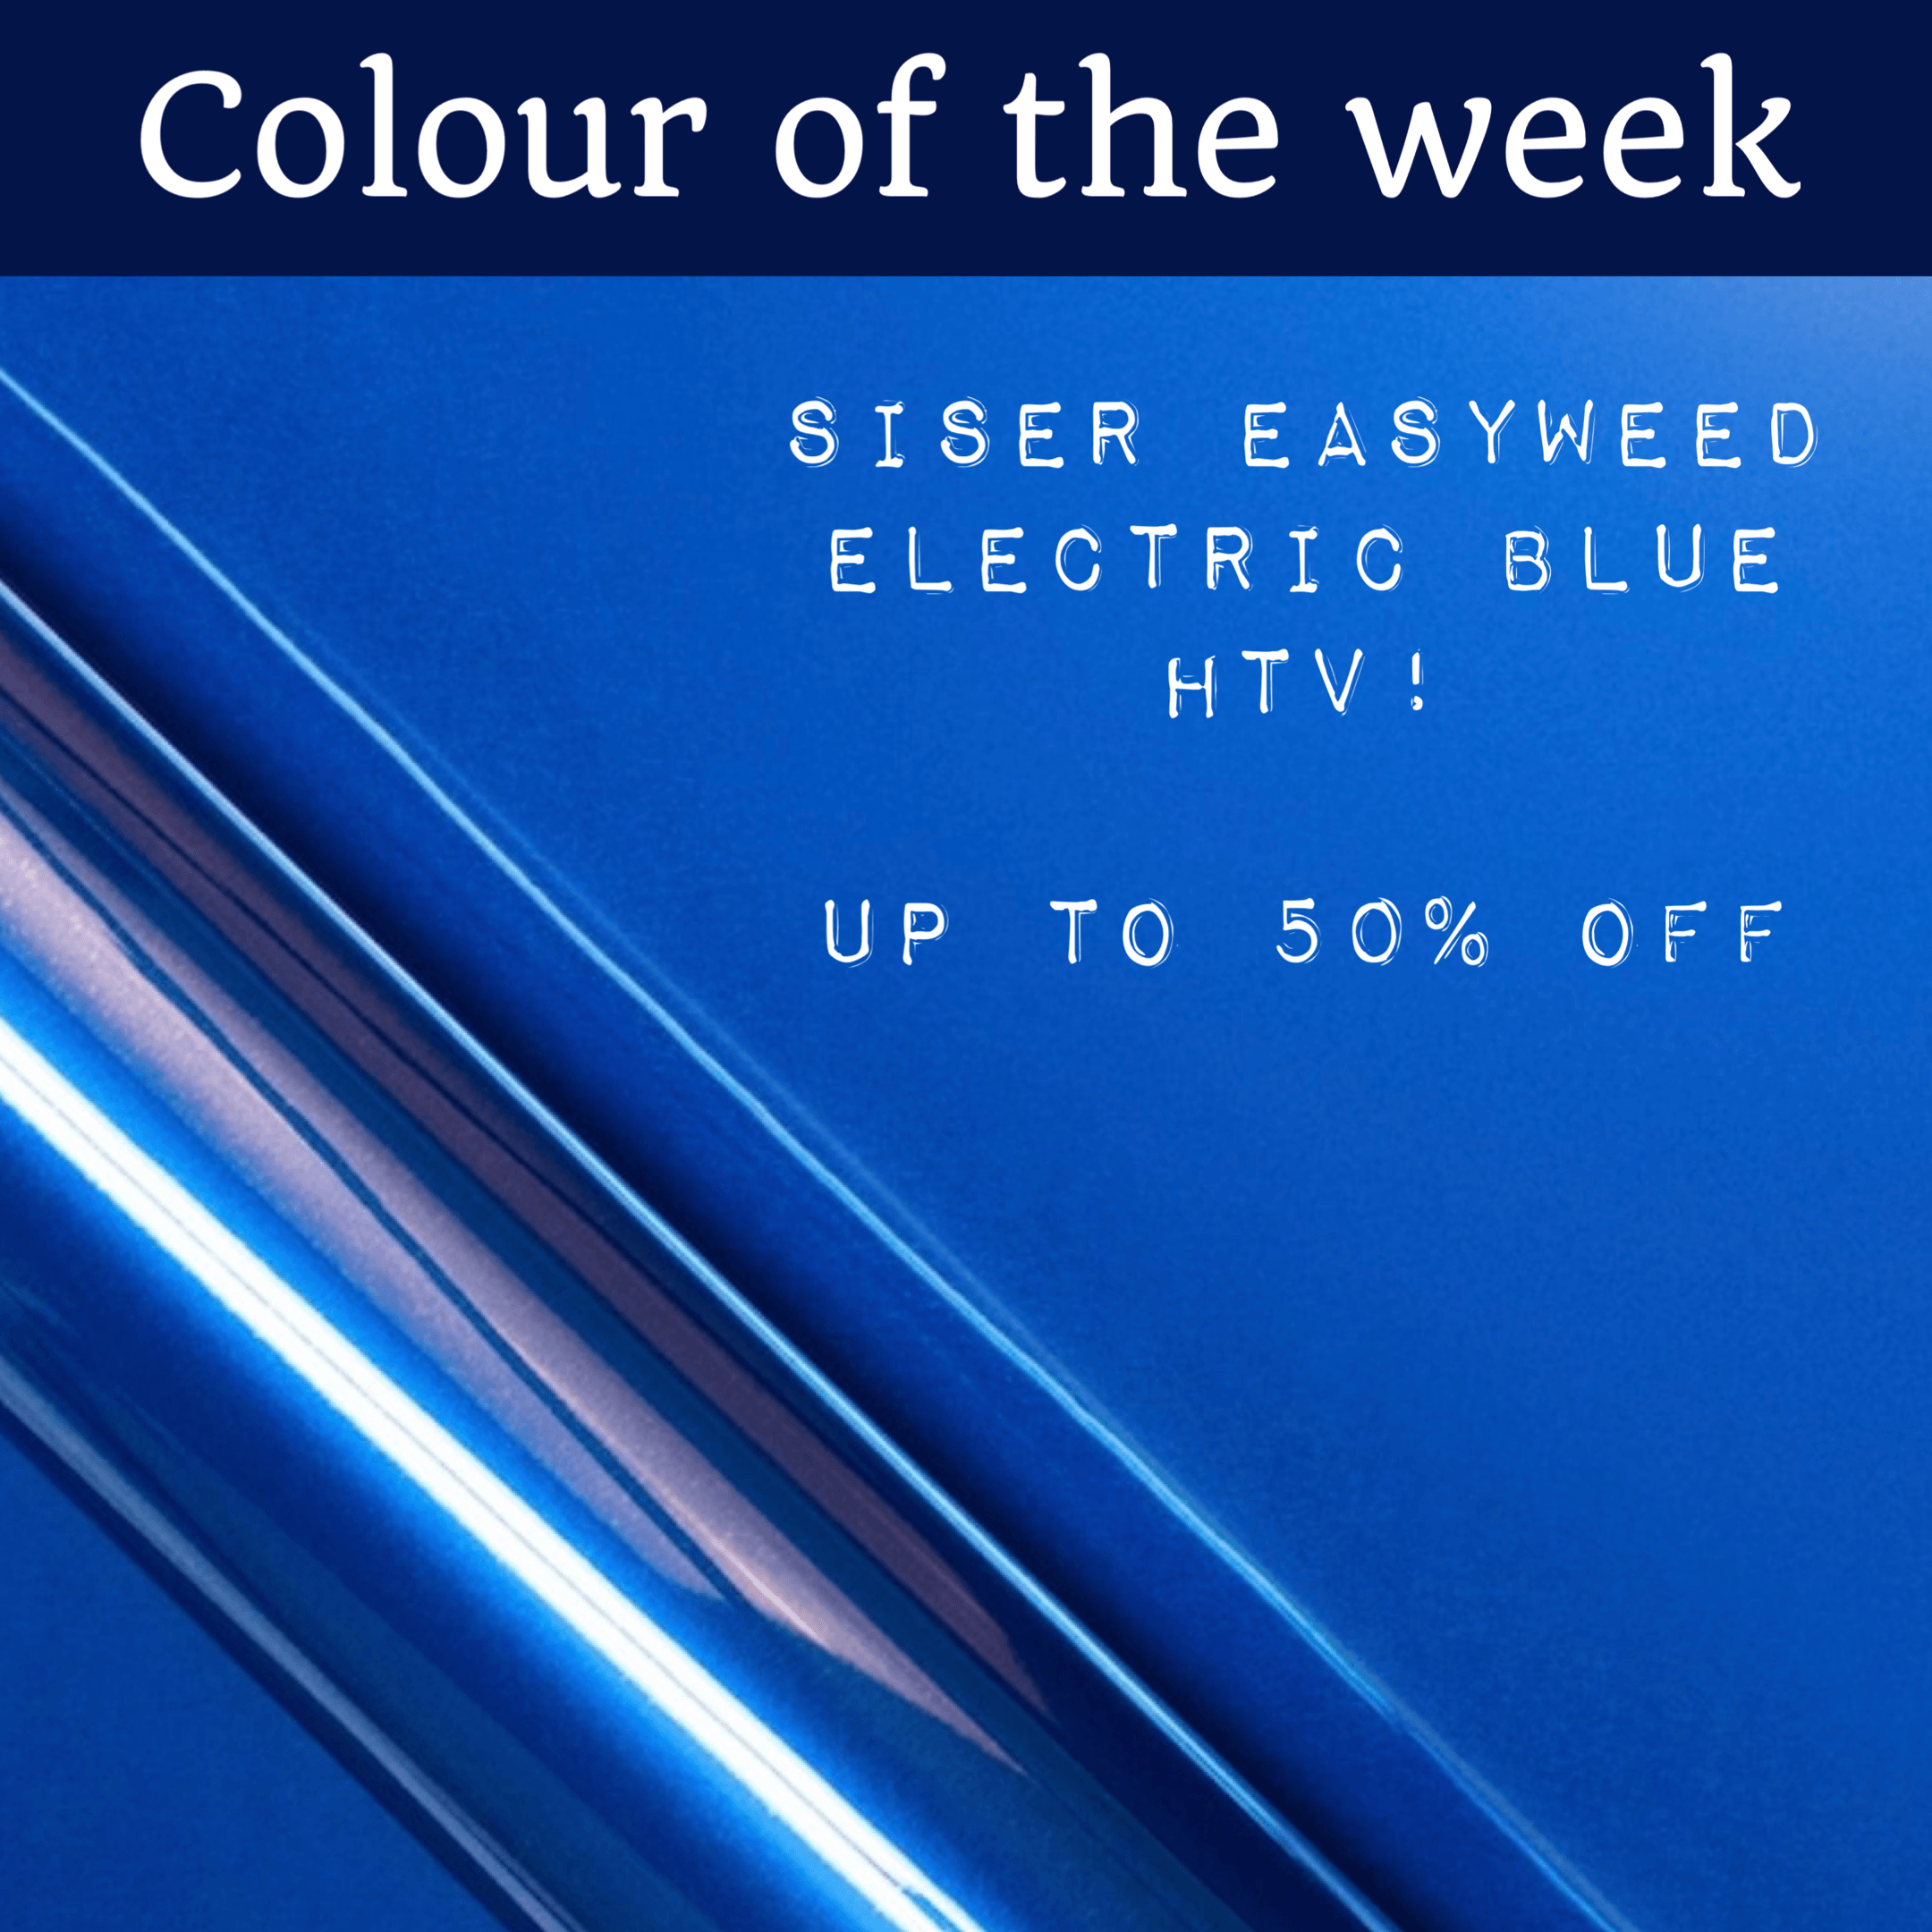 Colour of the week! Ends Feb 8 at 12pm EST.